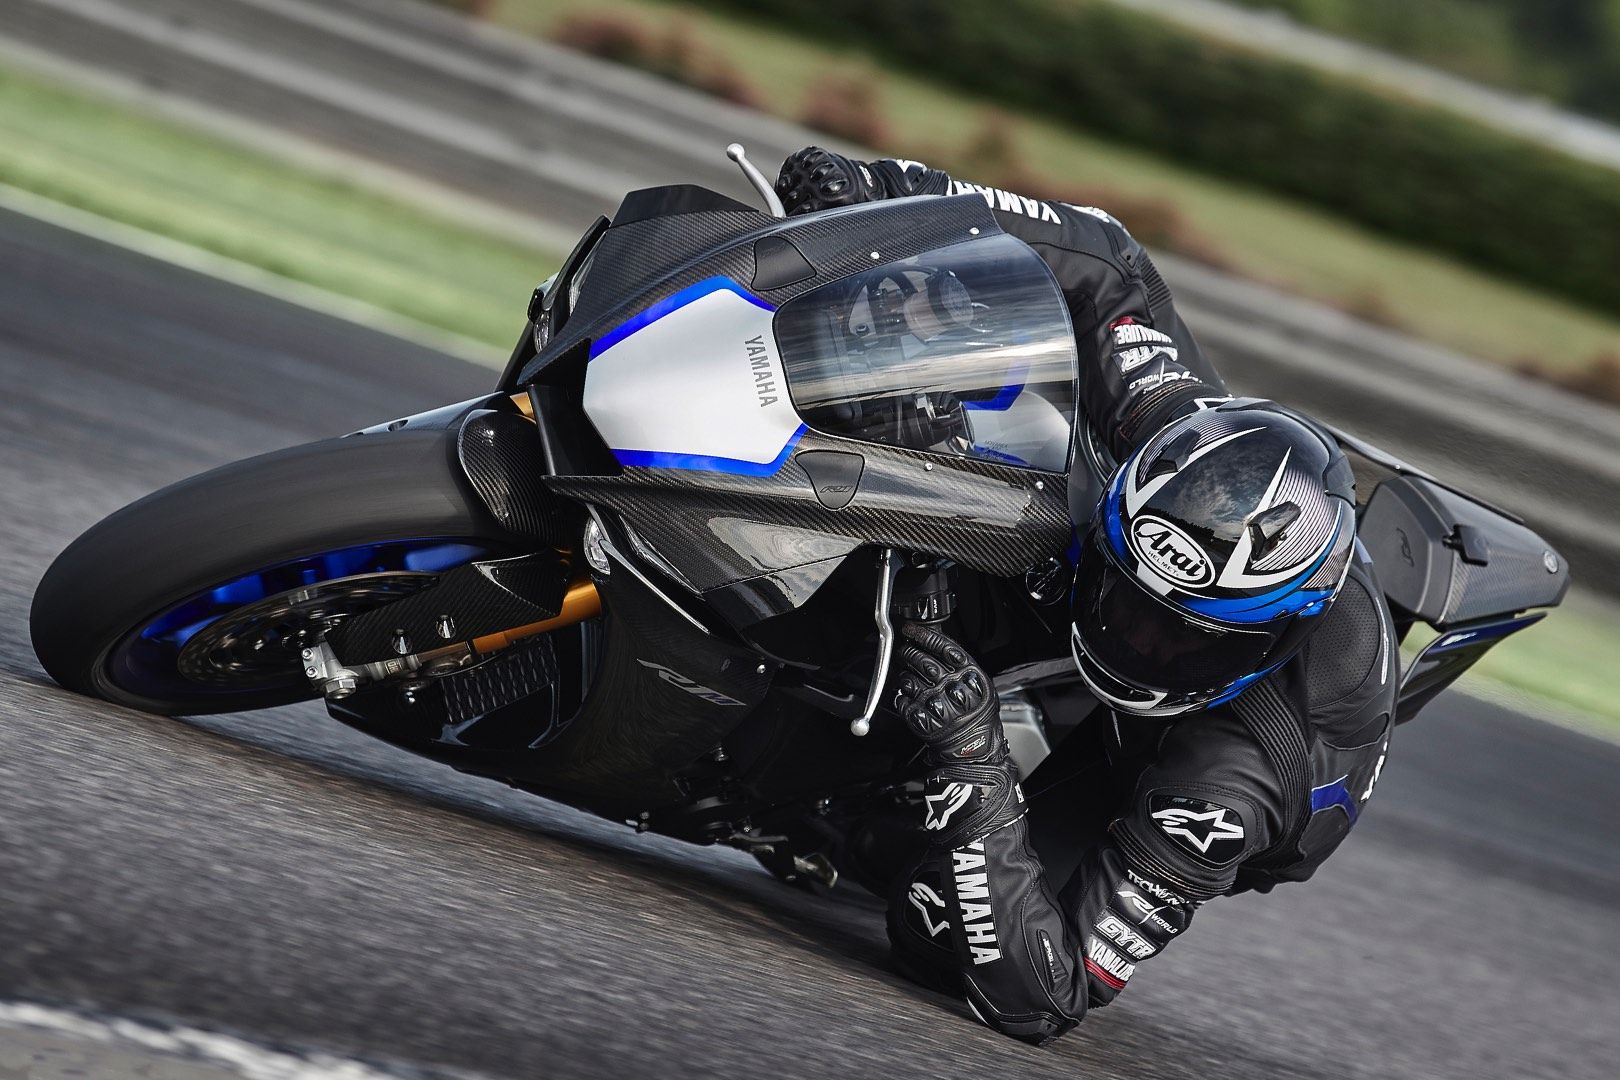 Yamaha YZF R1 And YZF R1M First Look (13 Fast Facts)